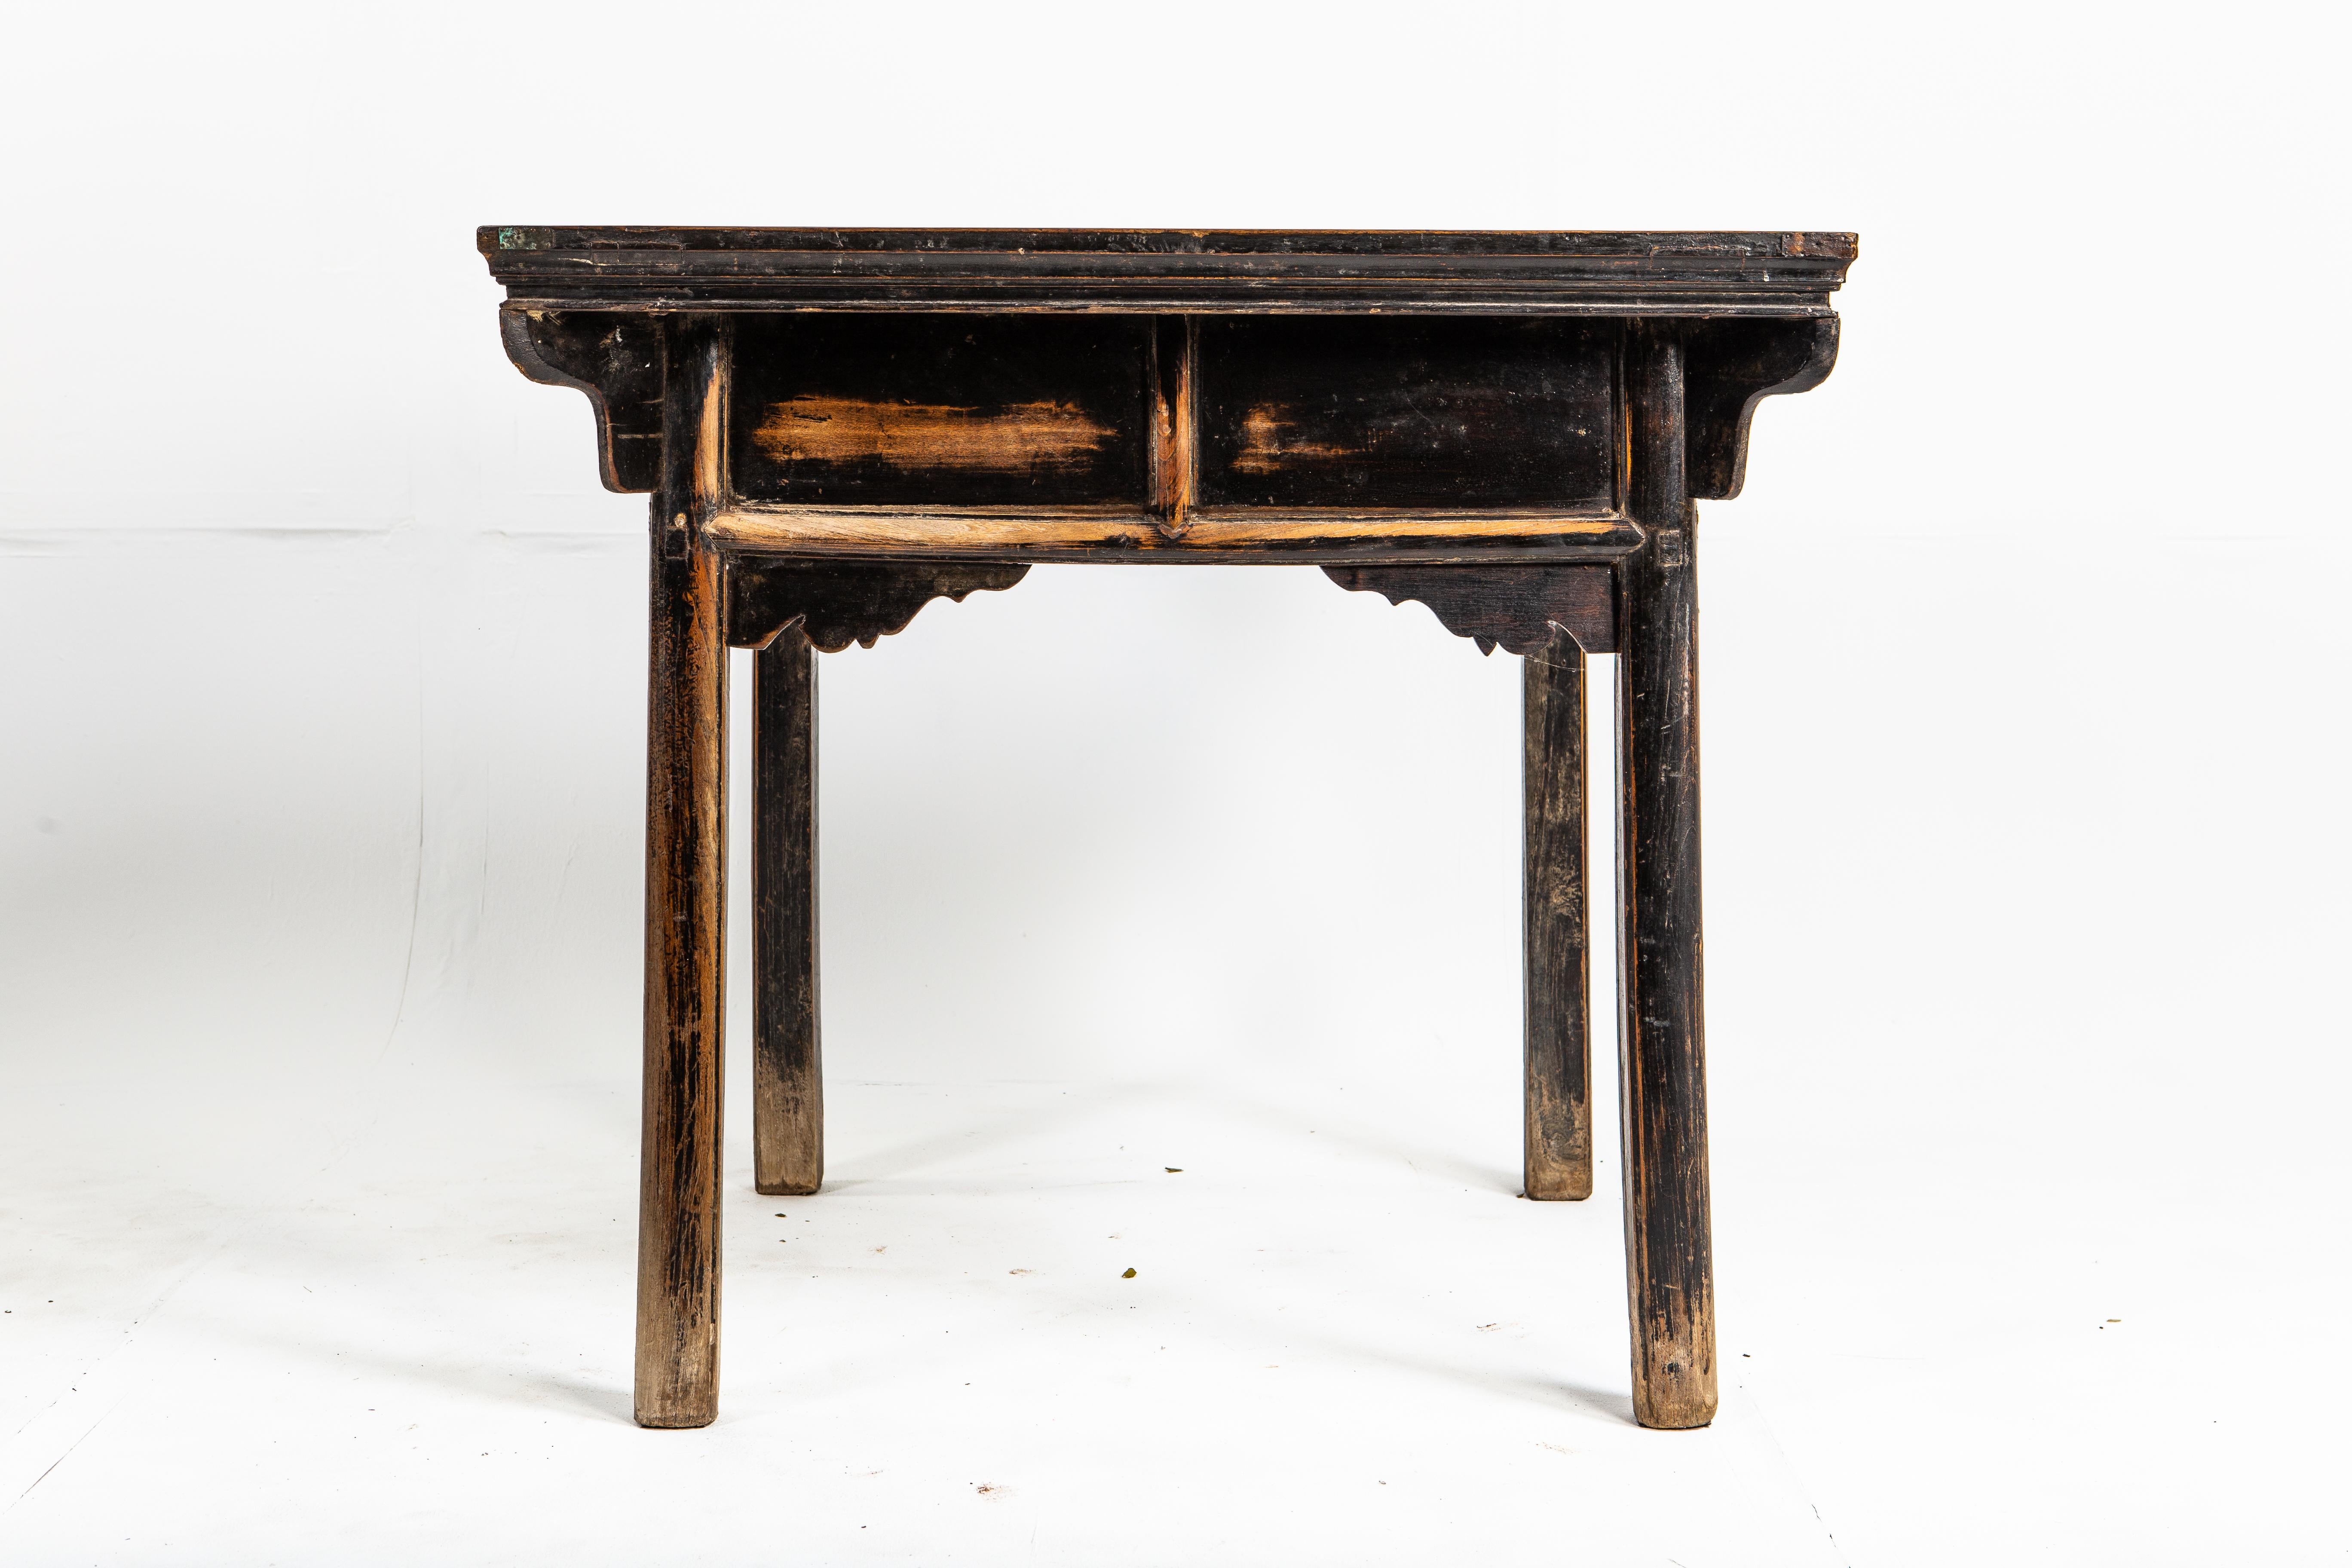 This late-Qing dynasty side table is made of elm. The piece has a hearty feel; it features its original patina, worn from age and use. The table features two drawers.